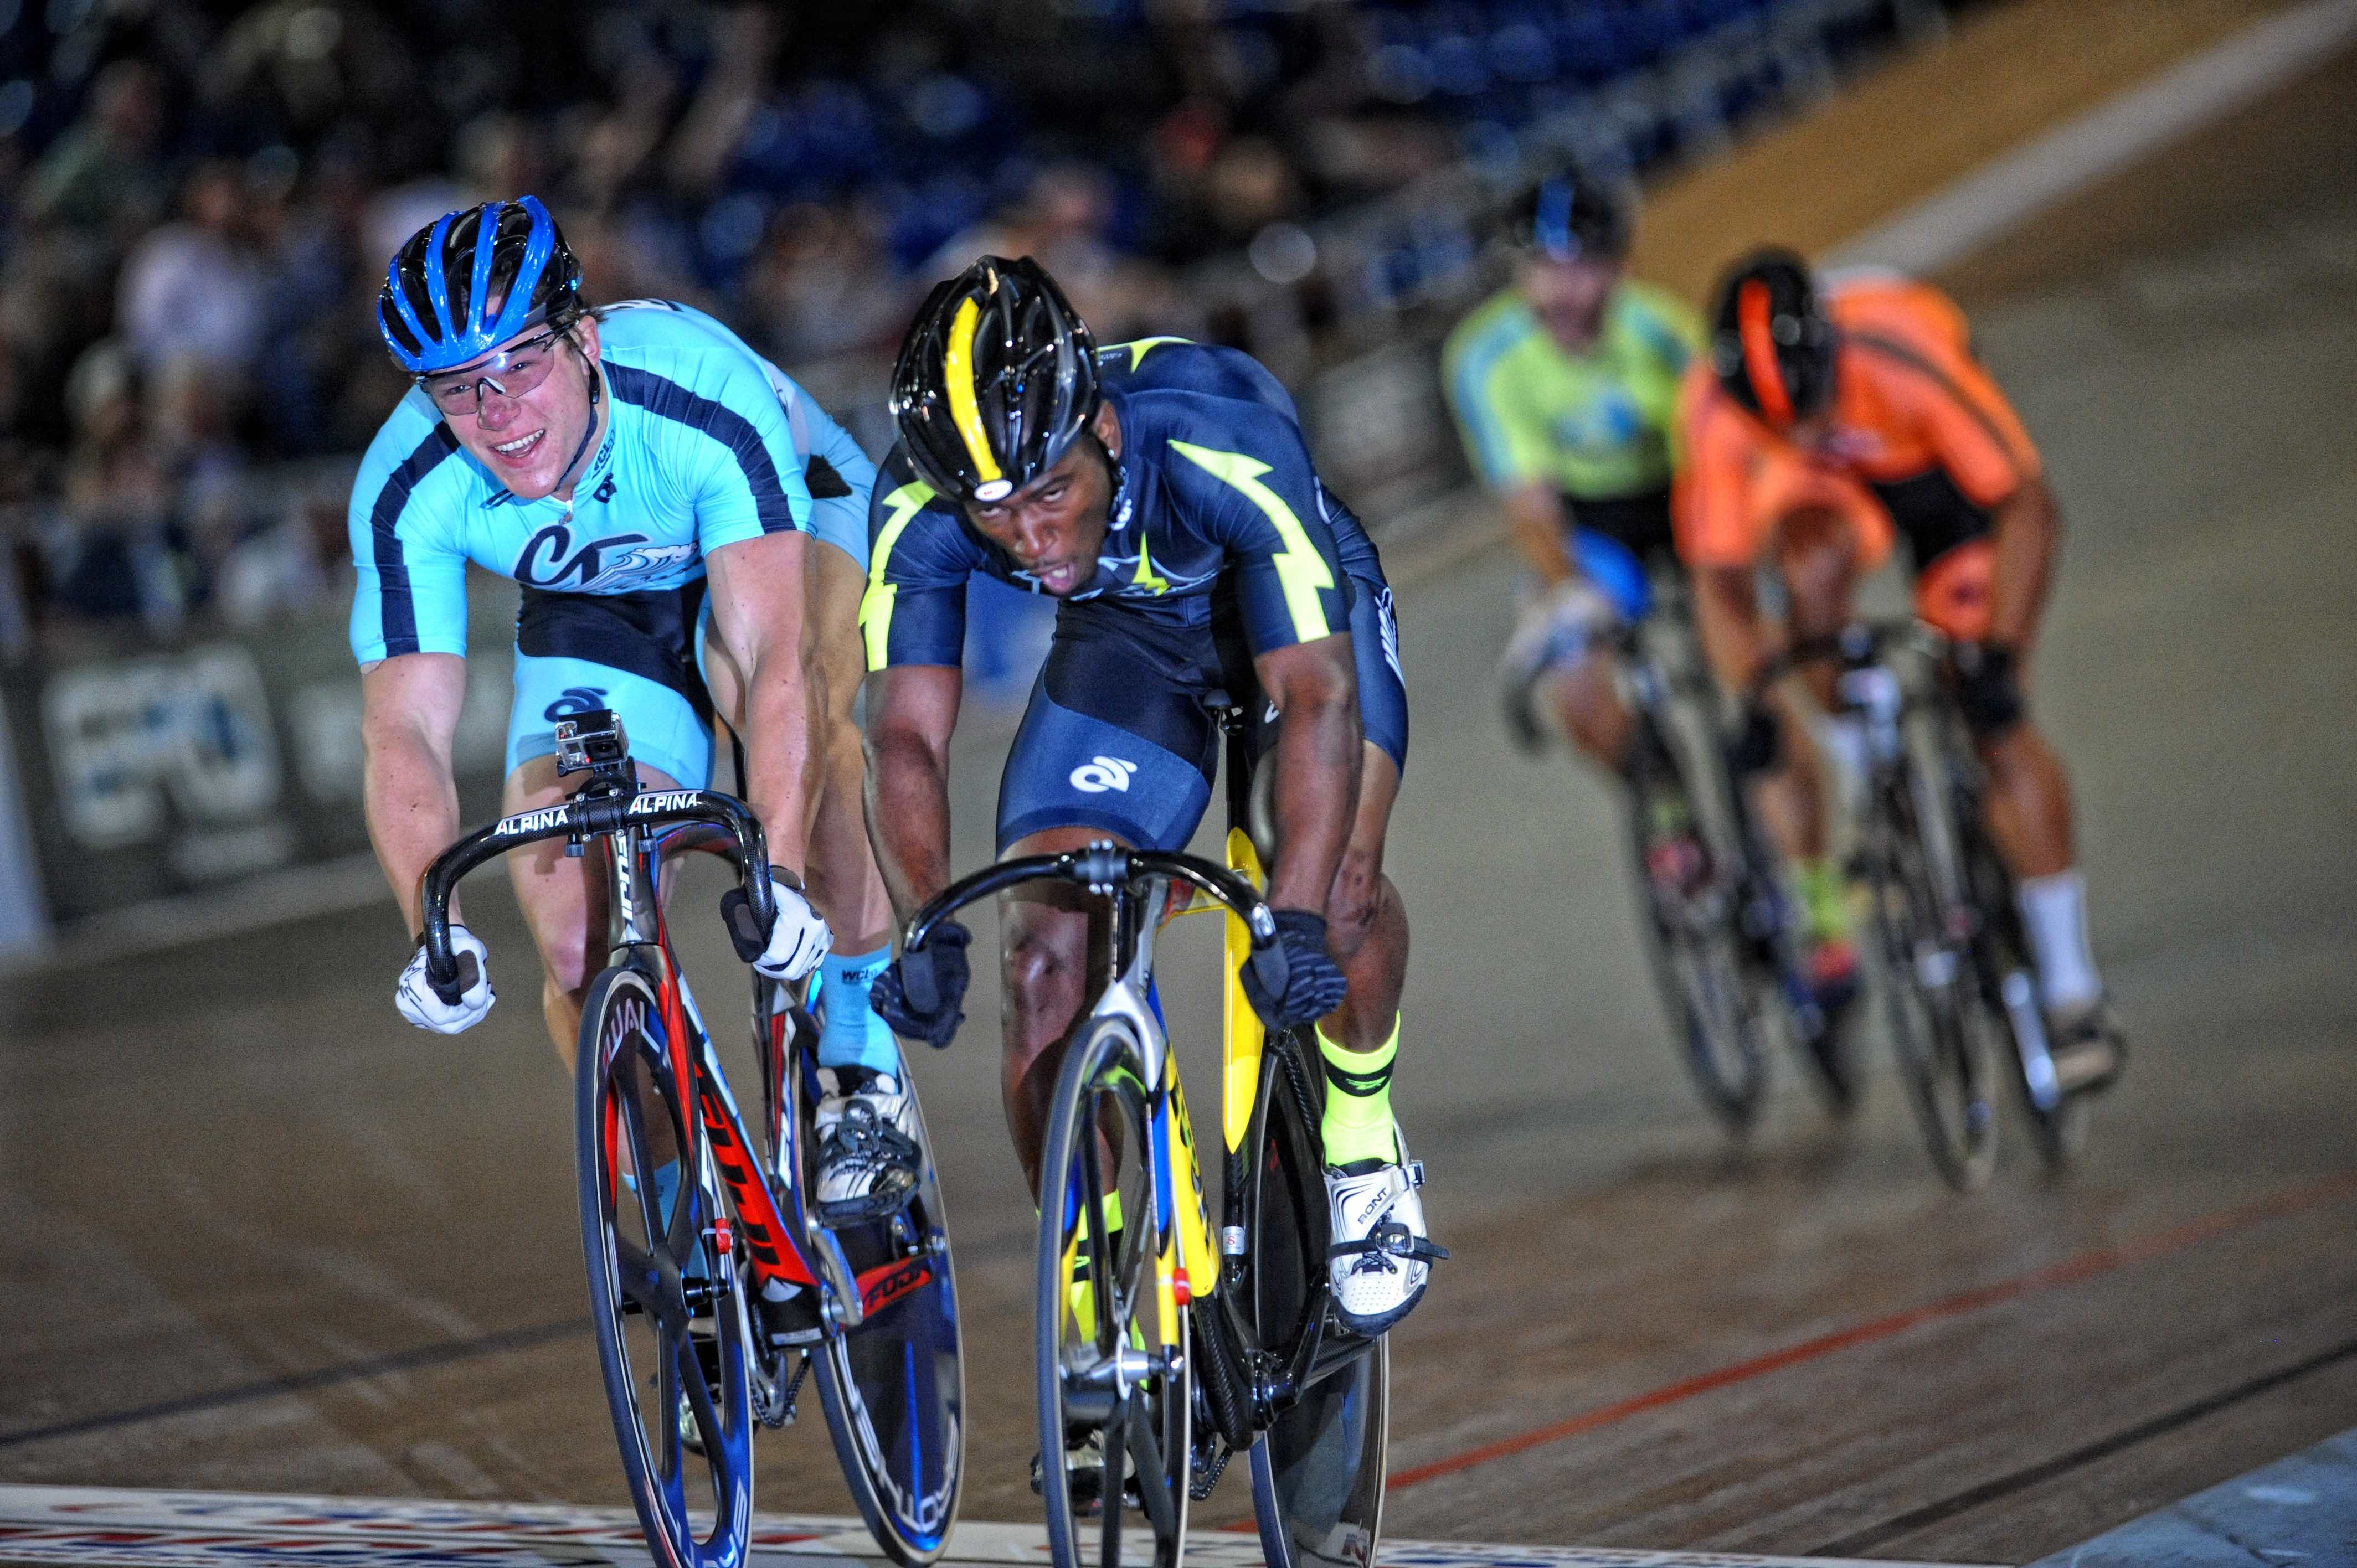 Trinidad’s Kwesi Browne of the winning PA Lightning outsprints Britain’s Matthew Rotherham of Connecticut Nor’Easter in the 500 meter sprint of Saturday night’s World Cycling League launch.